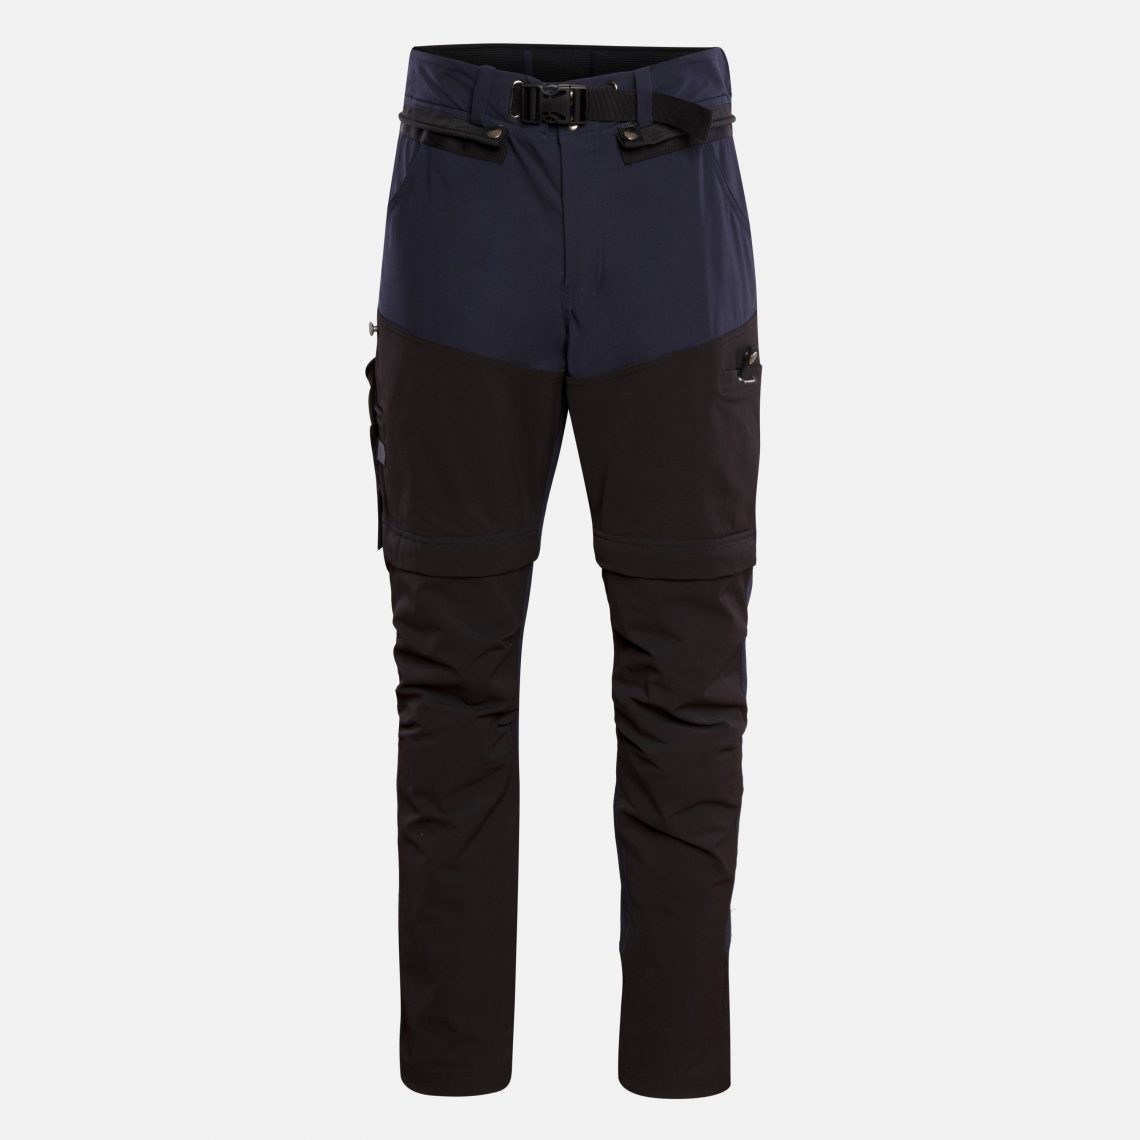 Work trousers in cordura fabric with high stretch capability